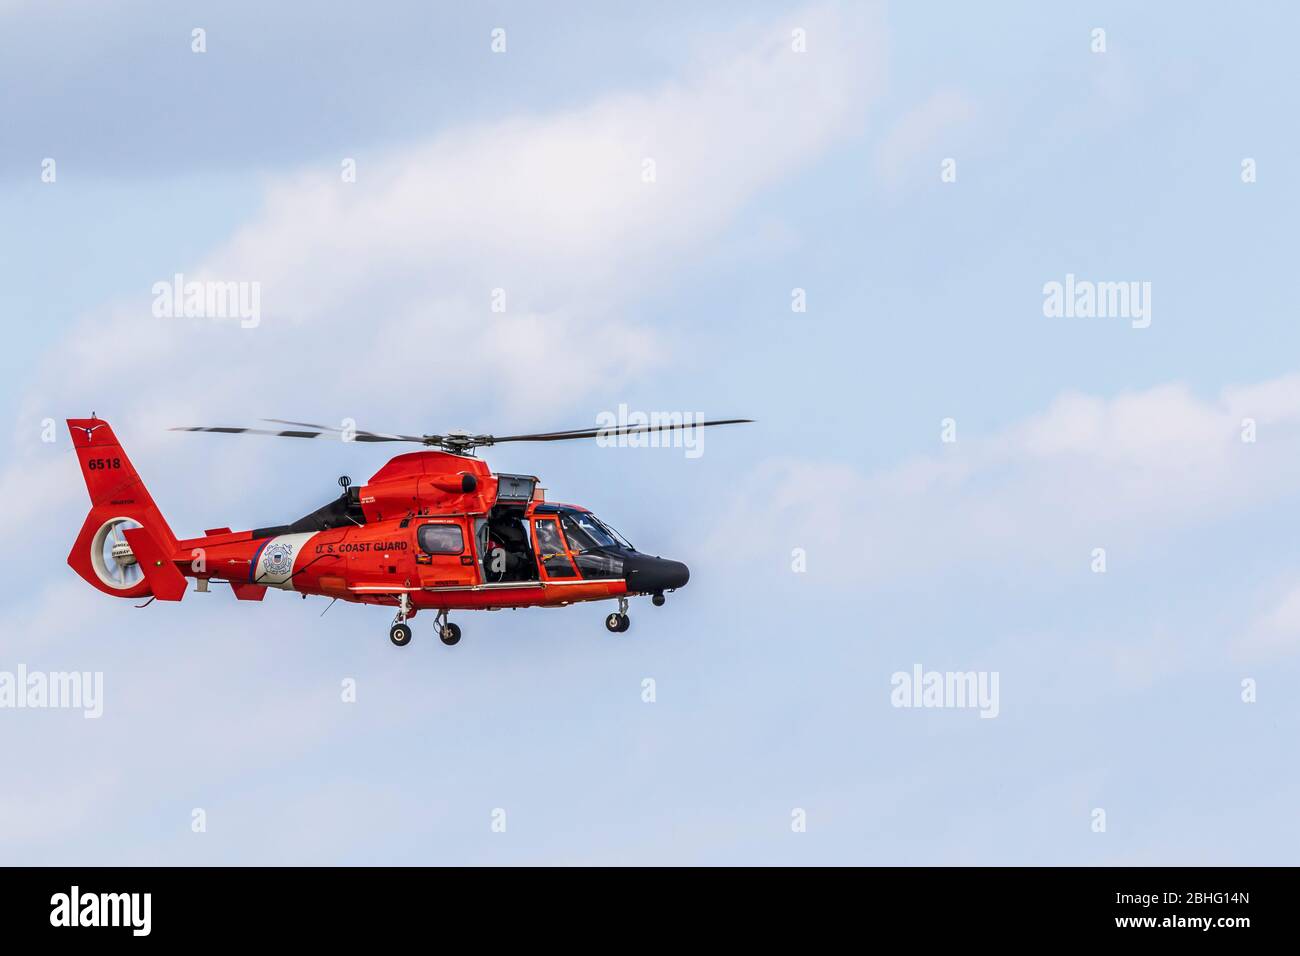 US Coast Guard MH-65 Dolphin Helicopter search and rescue demonstration at 2019 Wings Over Houston airshow, Houston, Texas. Stock Photo